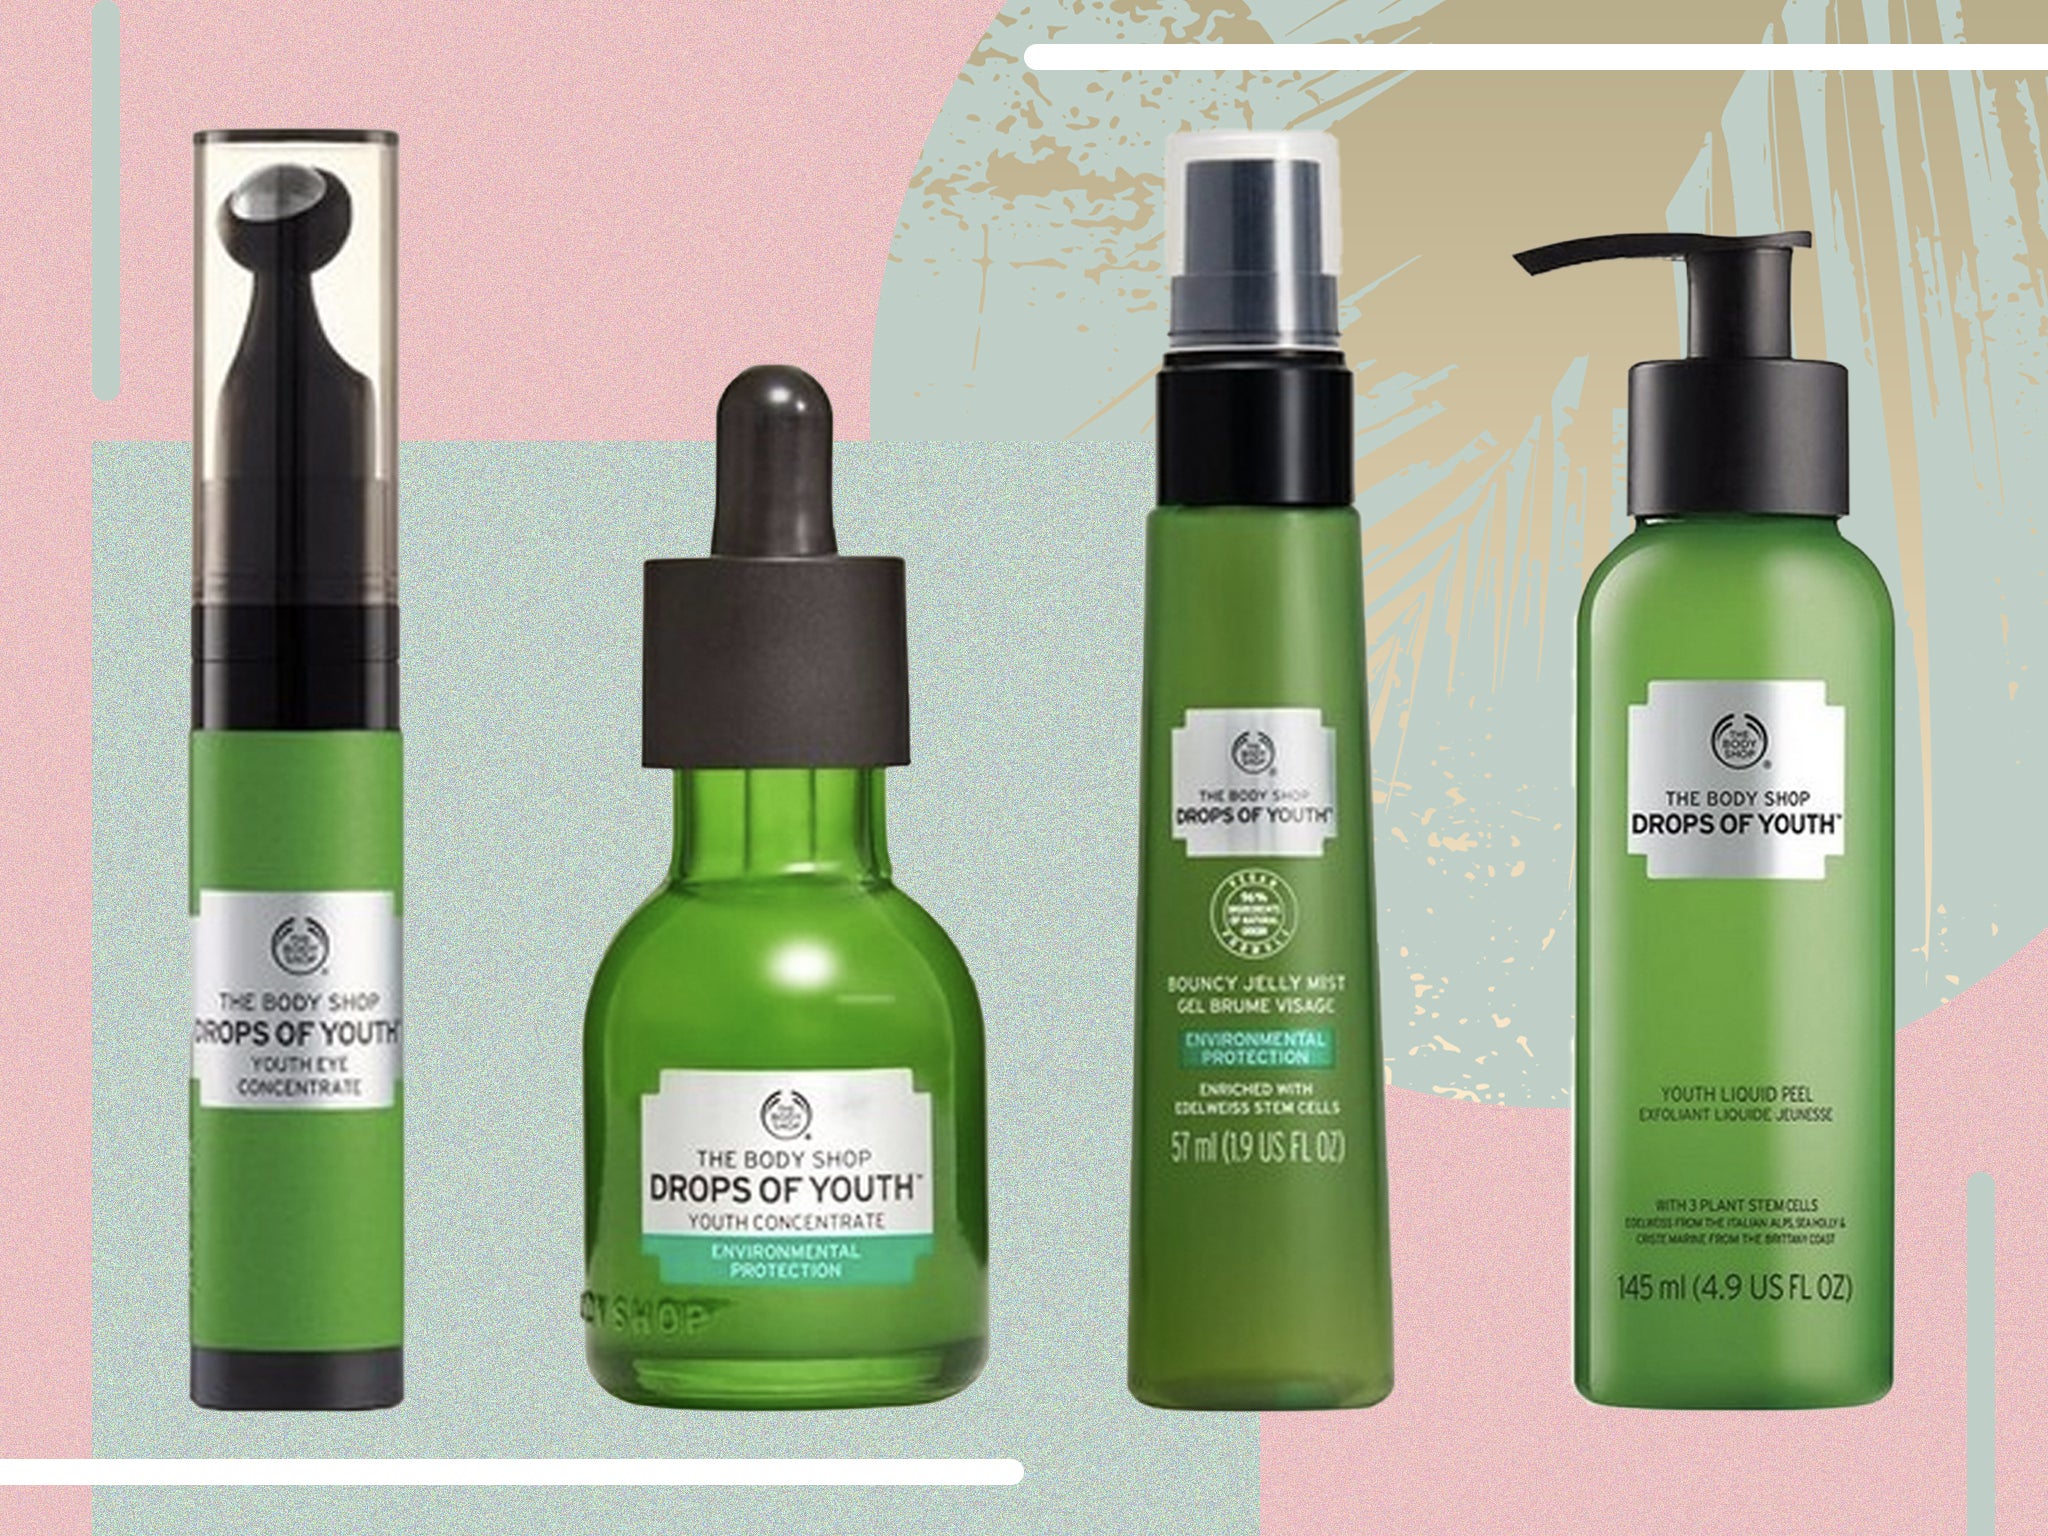 The Body Shop has released new Drops Youth range, we put to the test The Independent